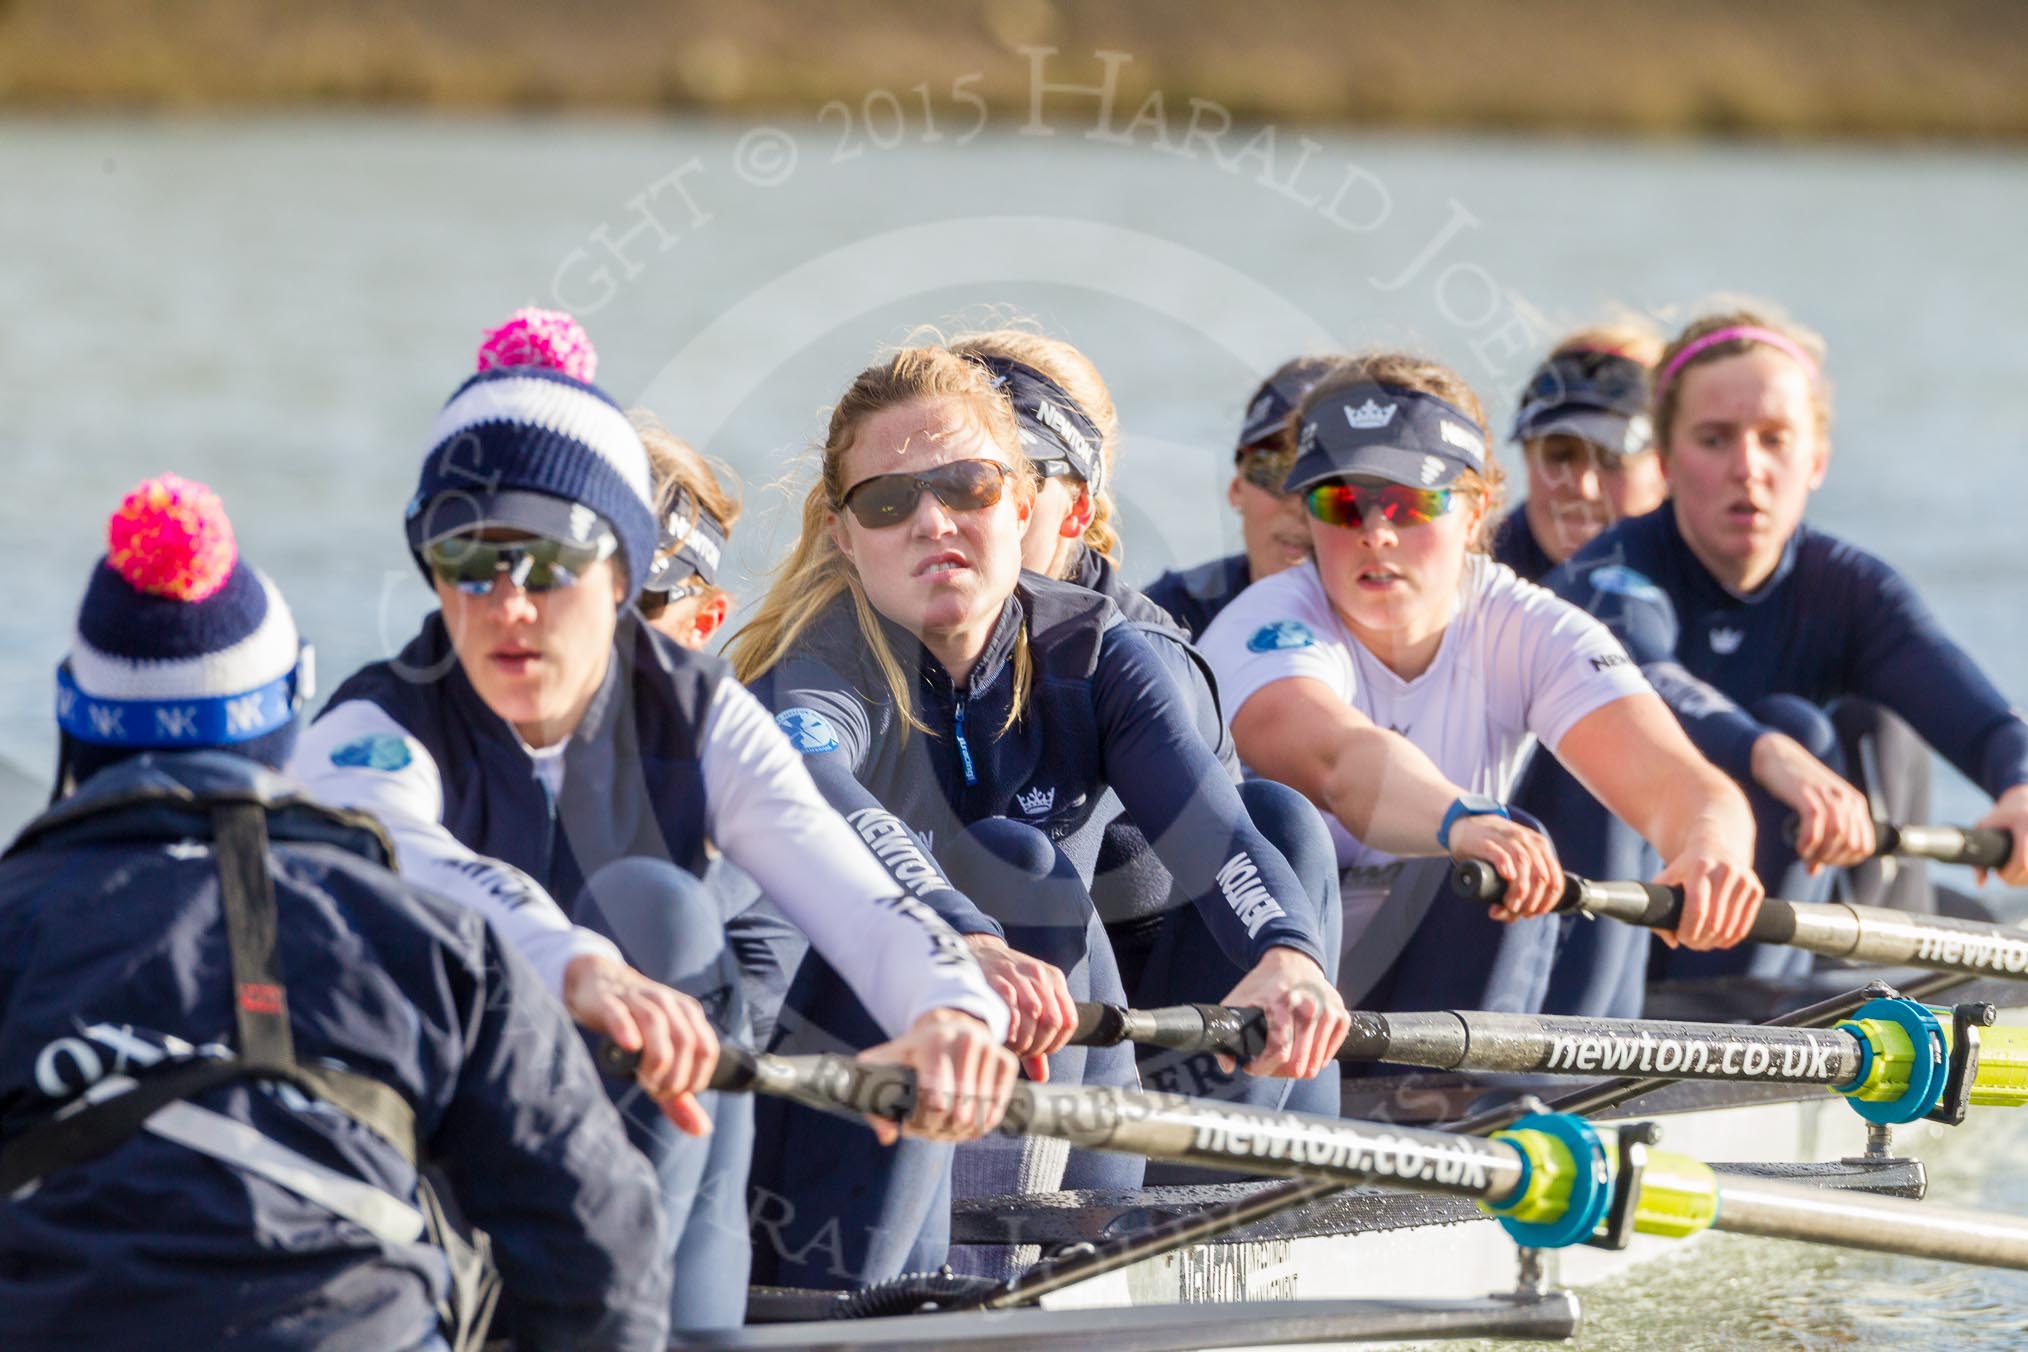 The Boat Race season 2015: OUWBC training Wallingford.

Wallingford,

United Kingdom,
on 04 March 2015 at 15:44, image #57